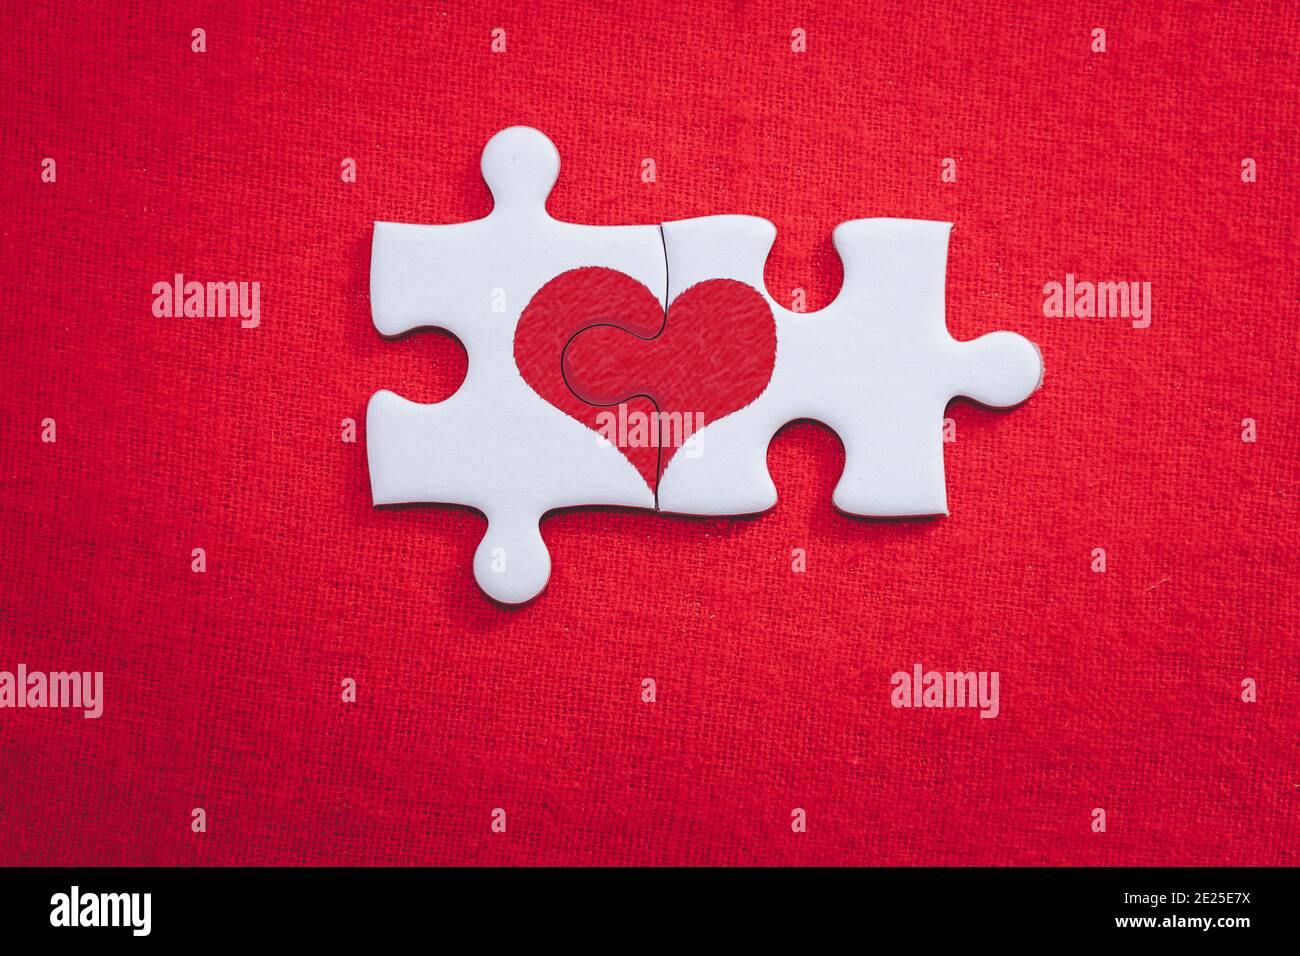 Heart shaped puzzle pieces love valentine concept for valentines day and sweetest day on red gift box background Stock Photo